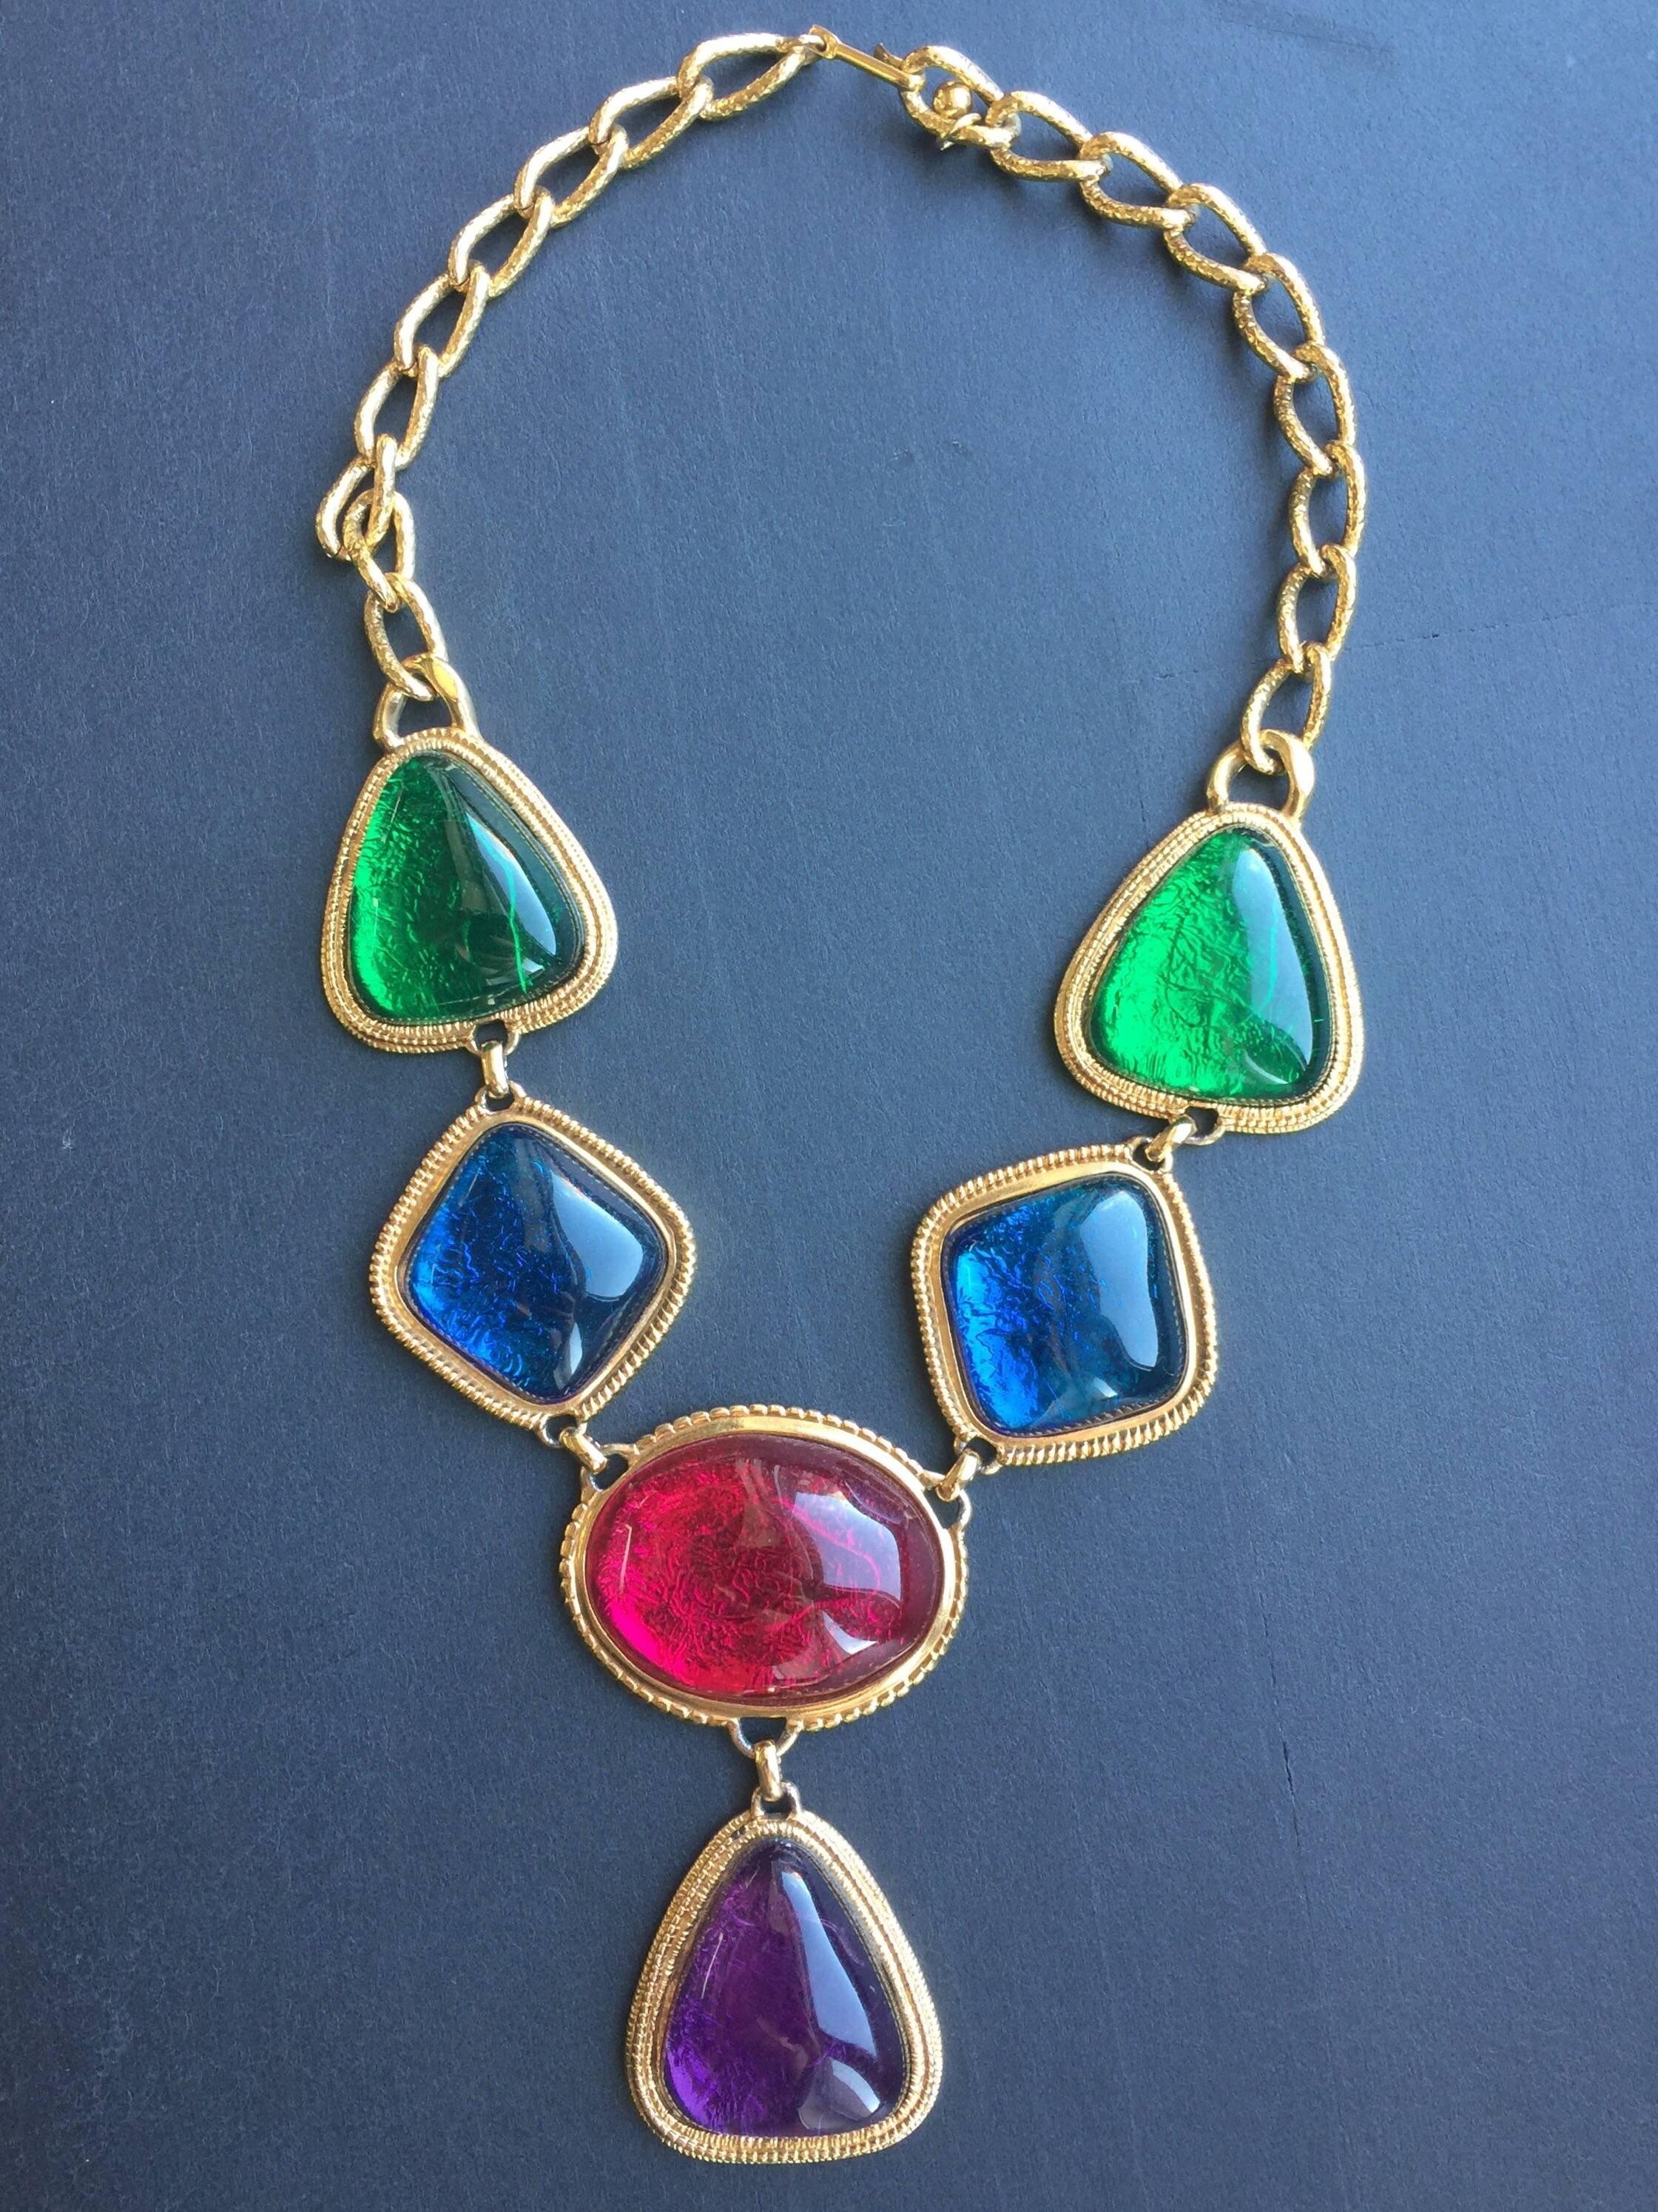 This KJL necklace is old tone with jewel tone stones.  Each stone is about 1 1/2" and the drop is  3 1/2 down from pink stone.